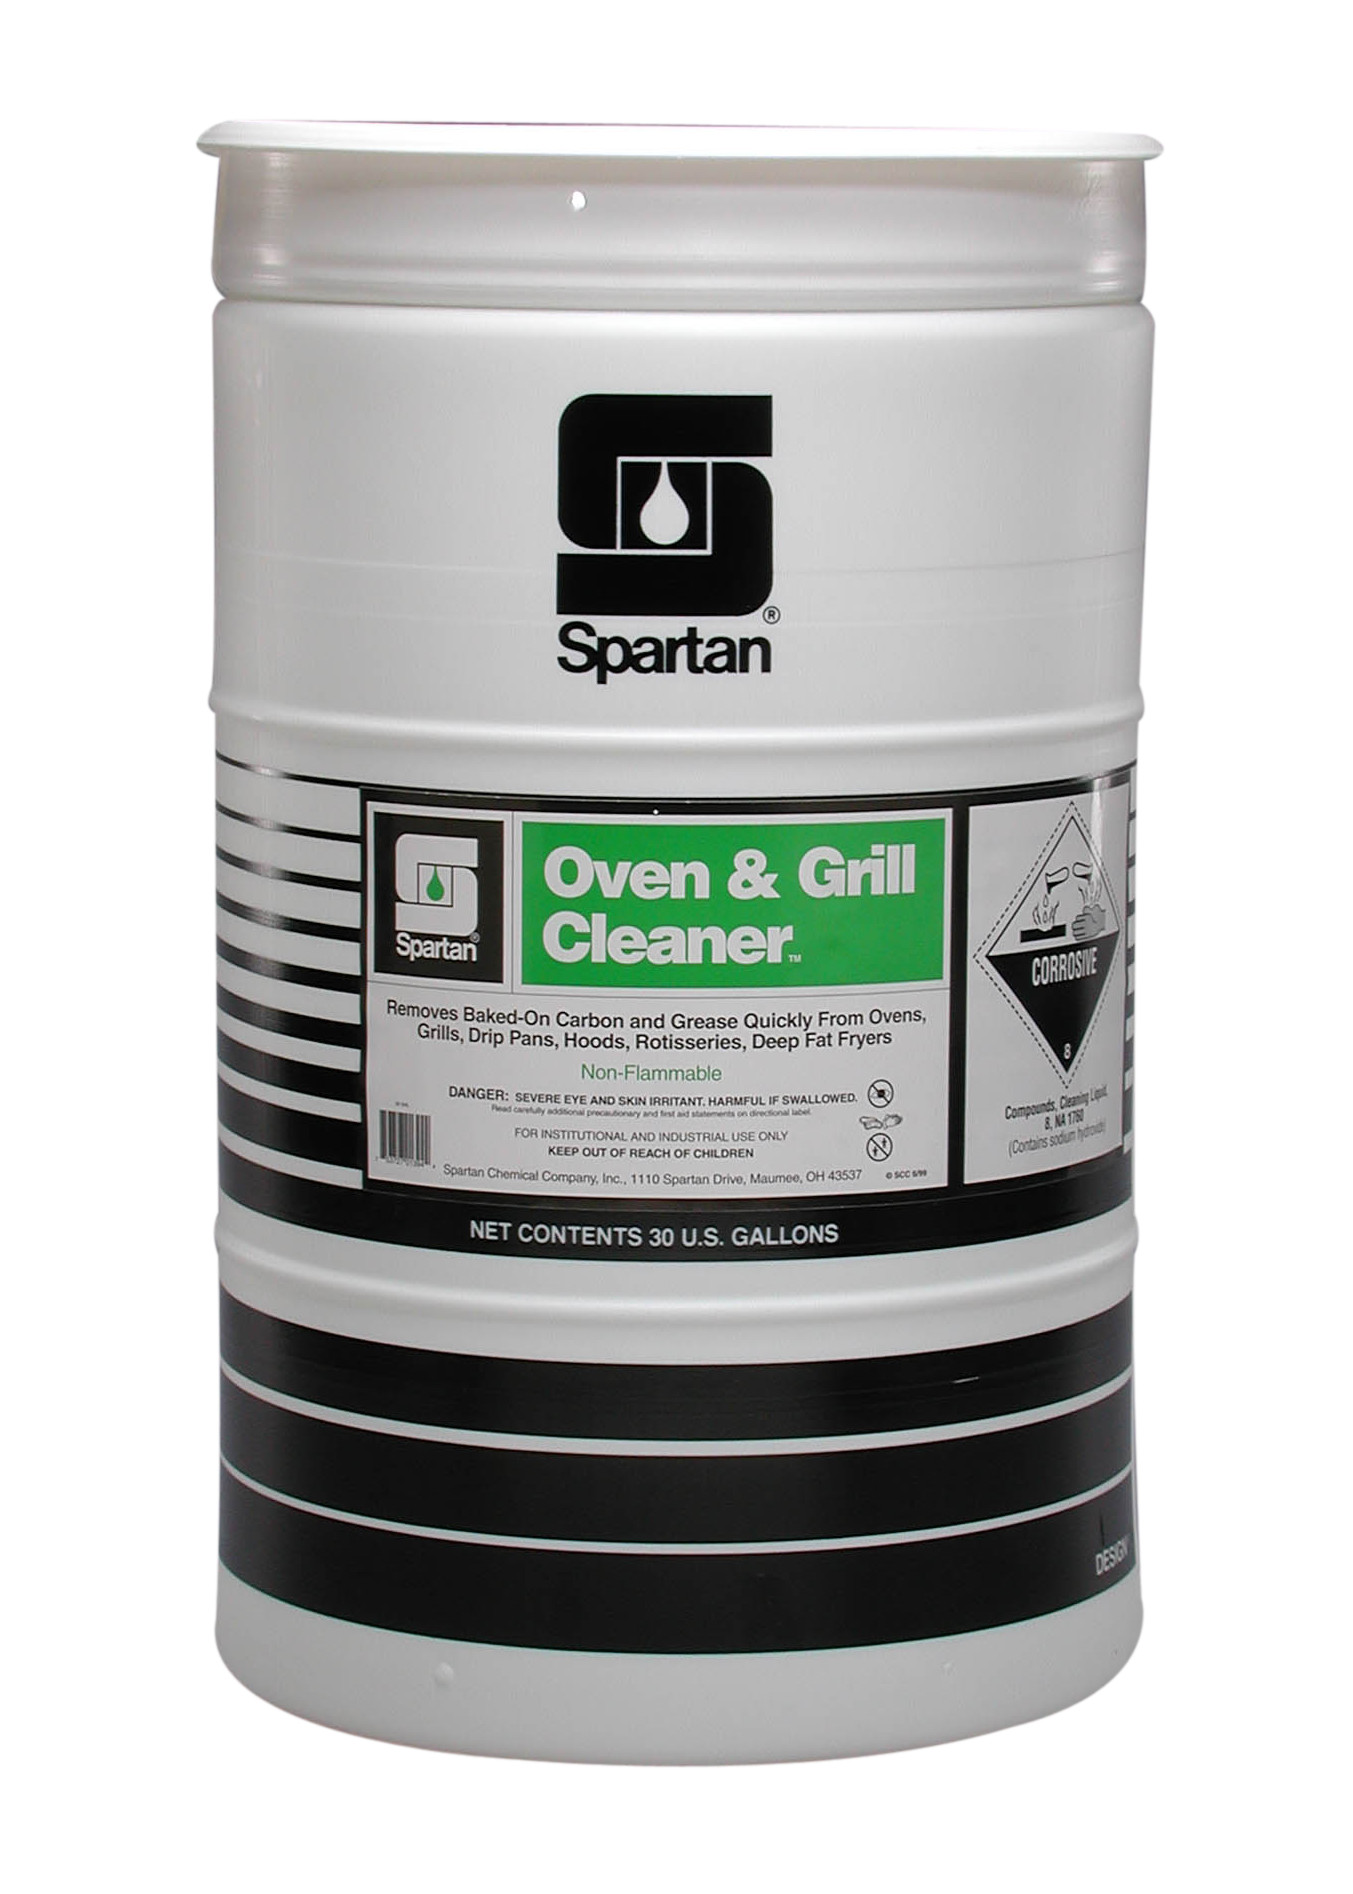 Spartan Chemical Company Oven & Grill Cleaner, 30 GAL DRUM